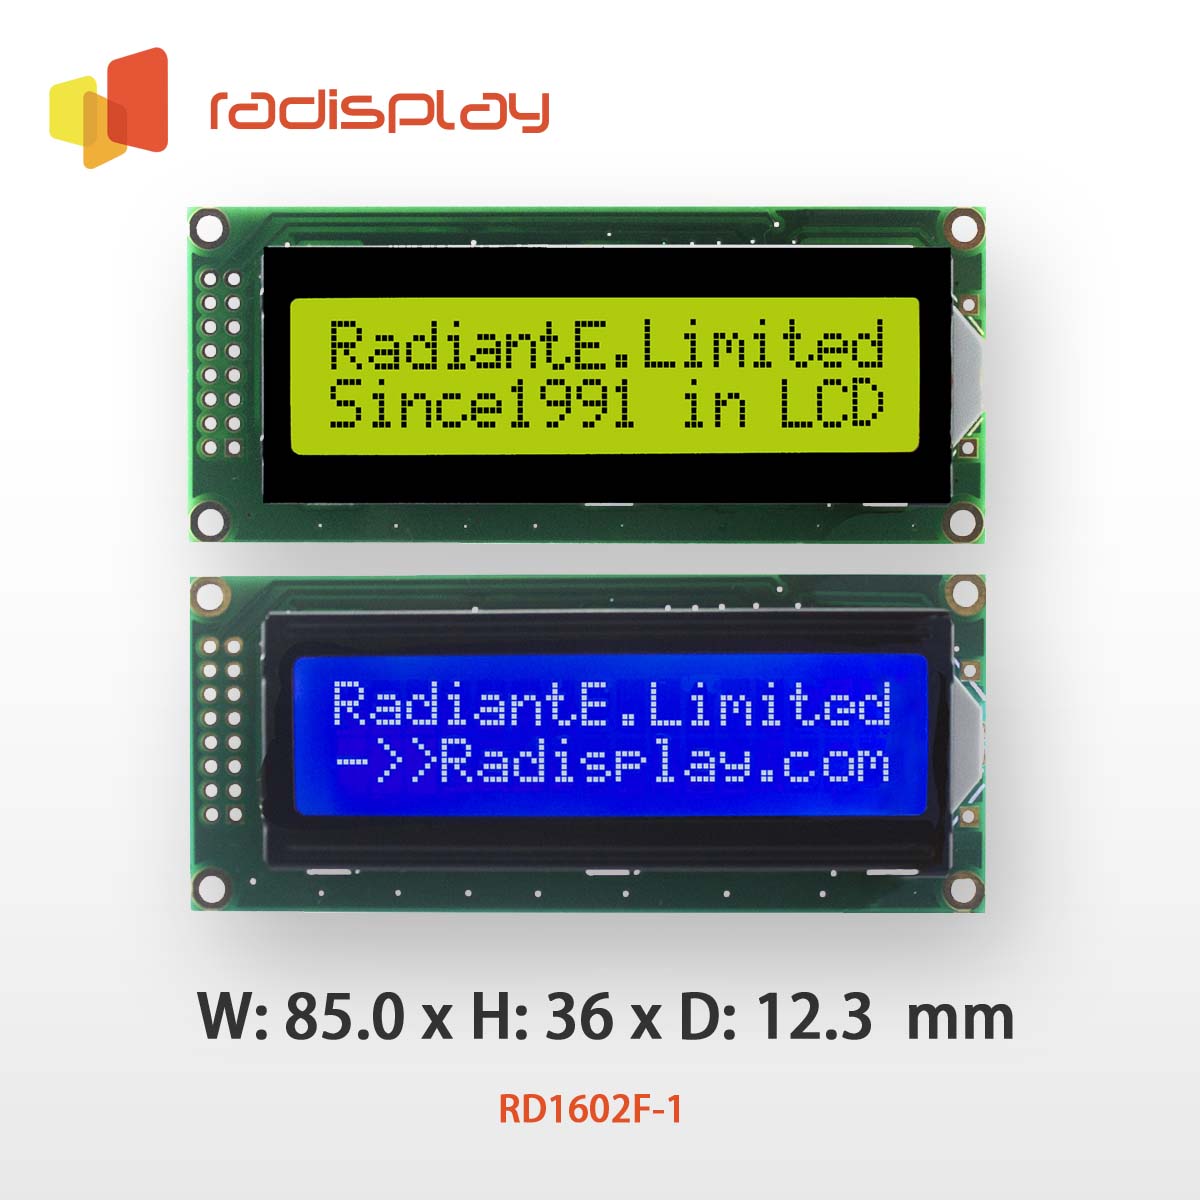 16x2 Character LCD Display Module, larger module size, (RD1602F-1)